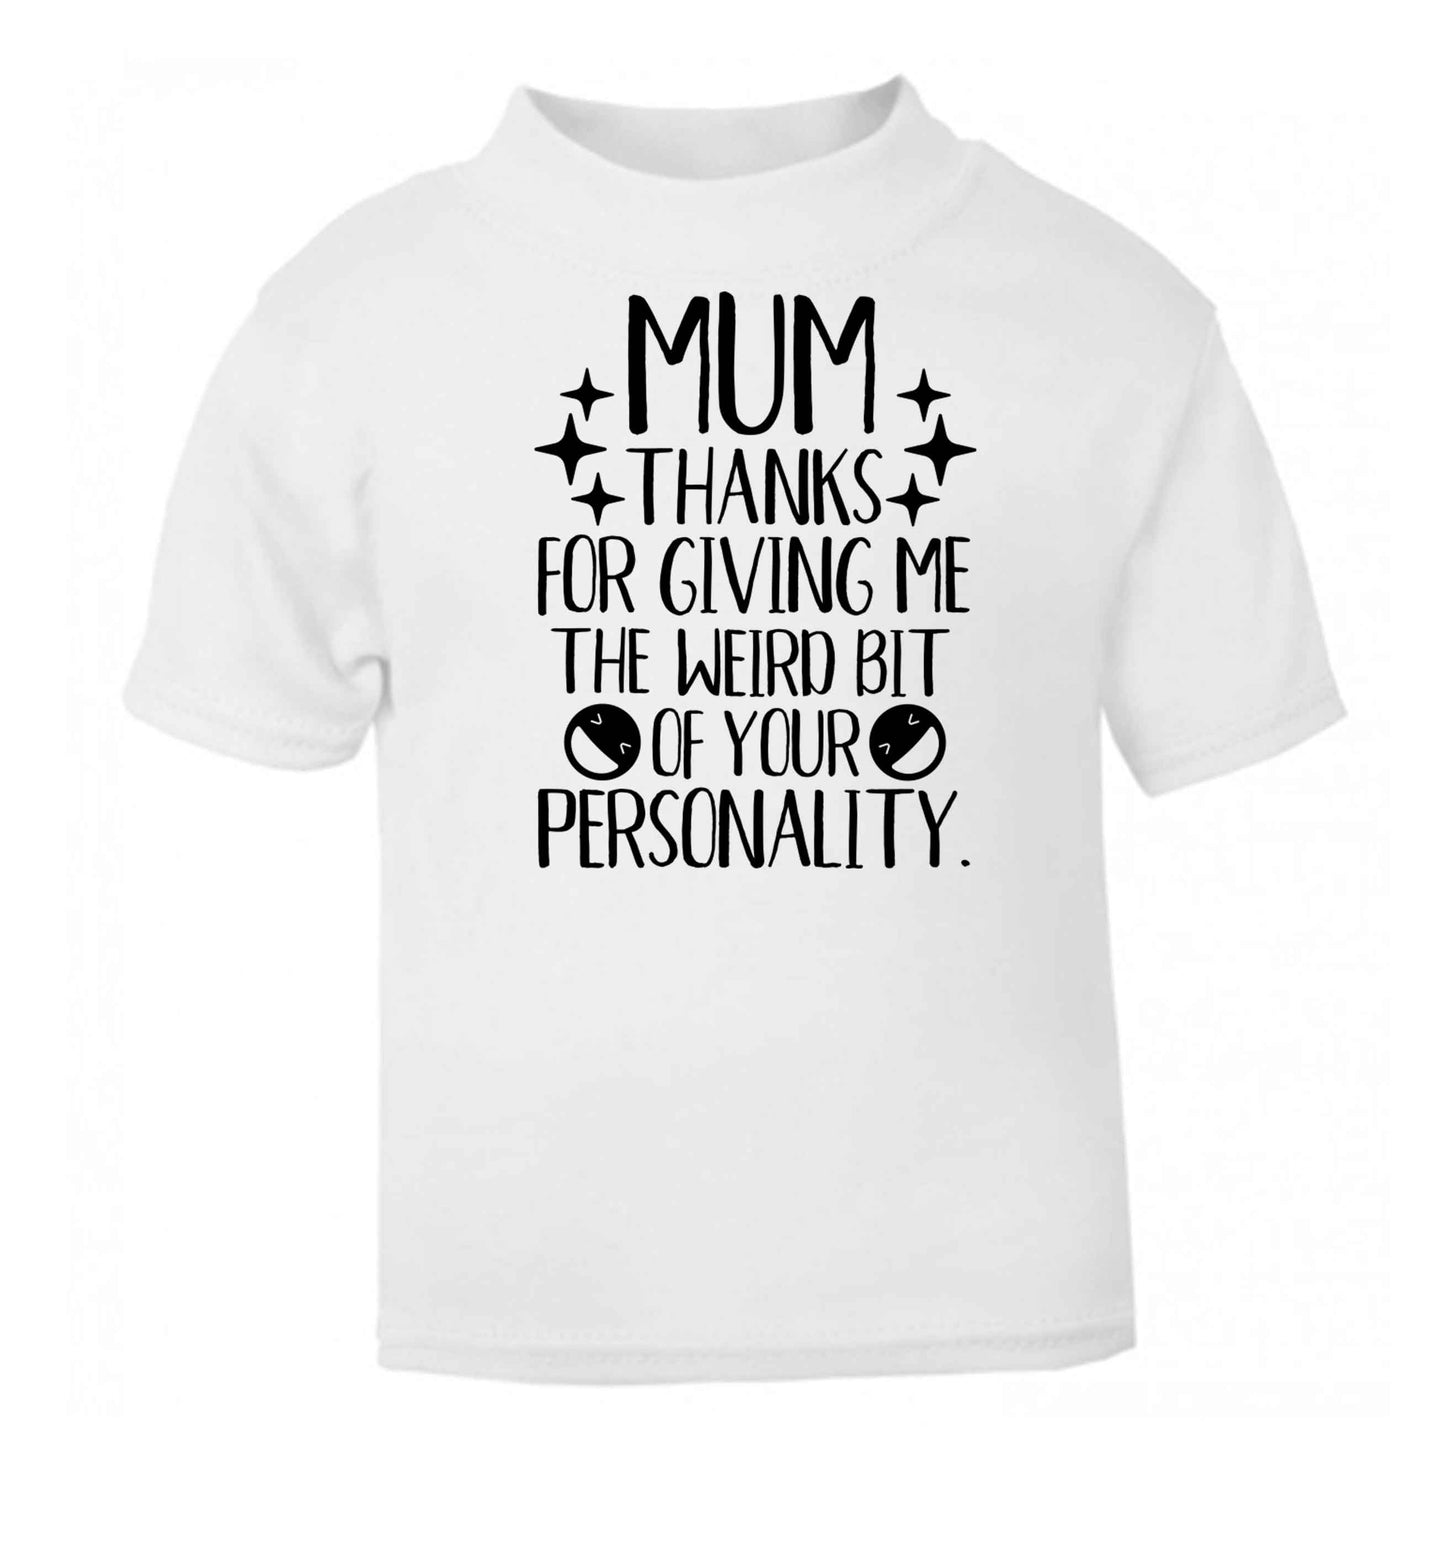 Mum, I love you more than halloumi and if you know me at all you know how deep that is white baby toddler Tshirt 2 Years